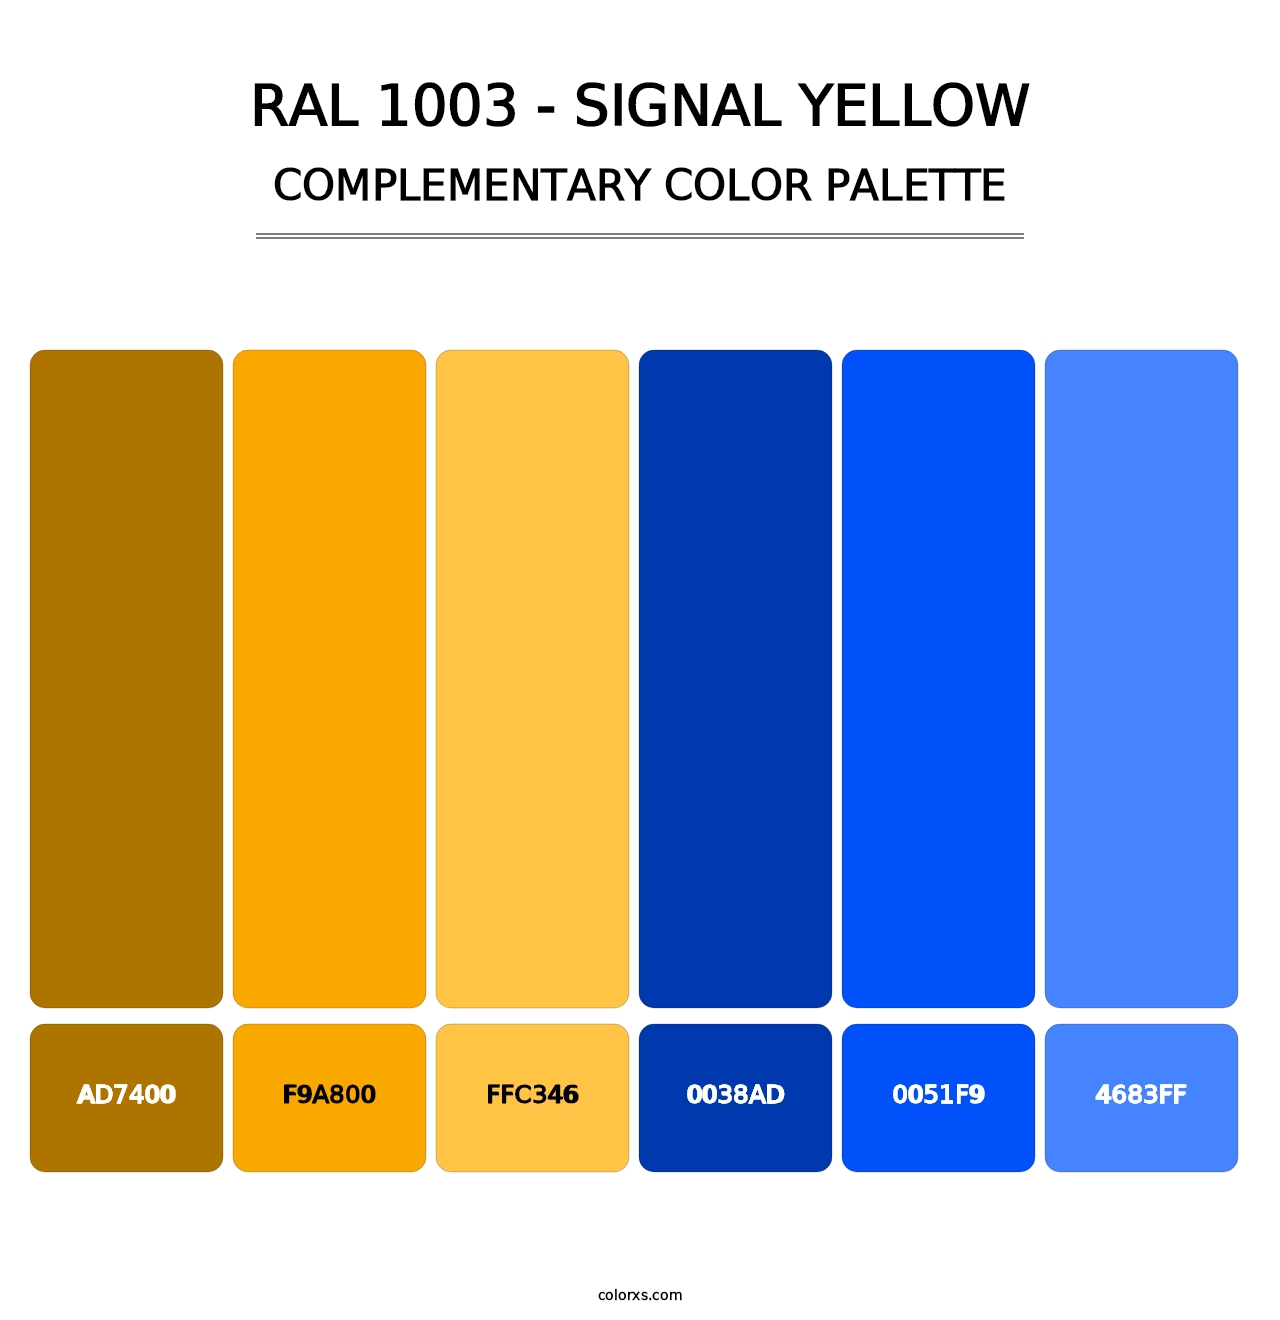 RAL 1003 - Signal Yellow - Complementary Color Palette